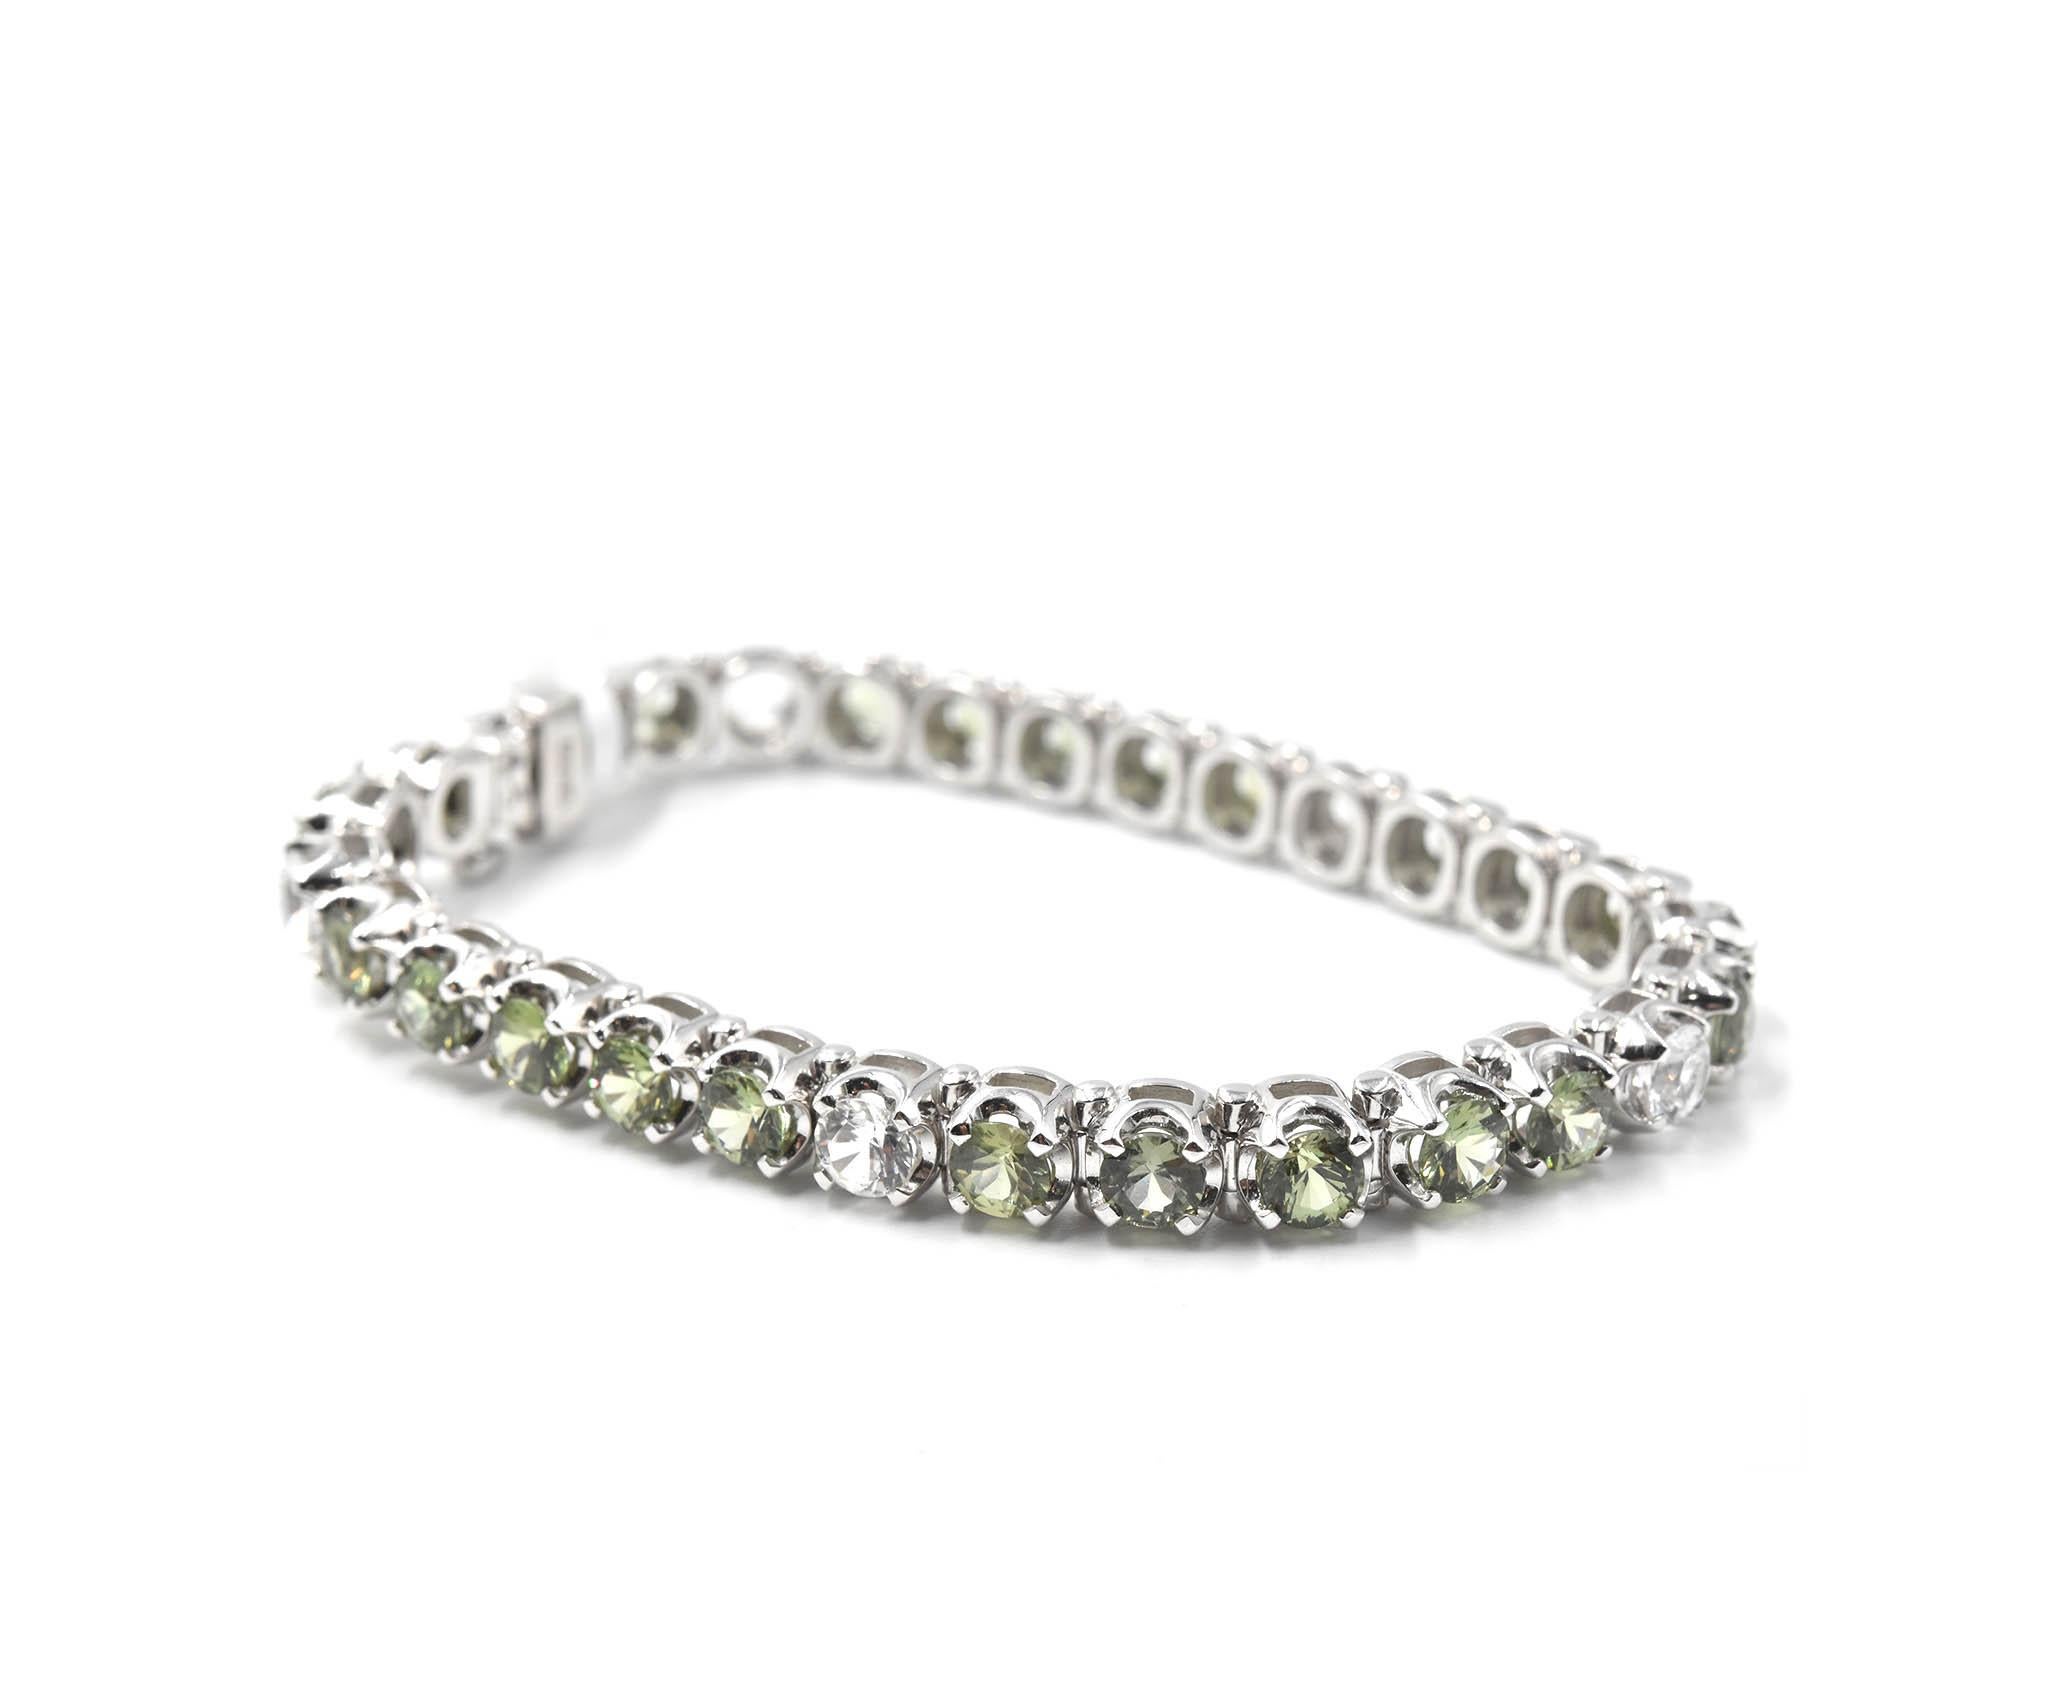 Designer: custom design
Material: 18k white gold
Green Sapphires: 10.97 carat weight
White Sapphires: 2.16 carat weight
Total Carat Weight: 13.13
Dimensions: bracelet is 7-inch long
Weight: 27.92 grams
